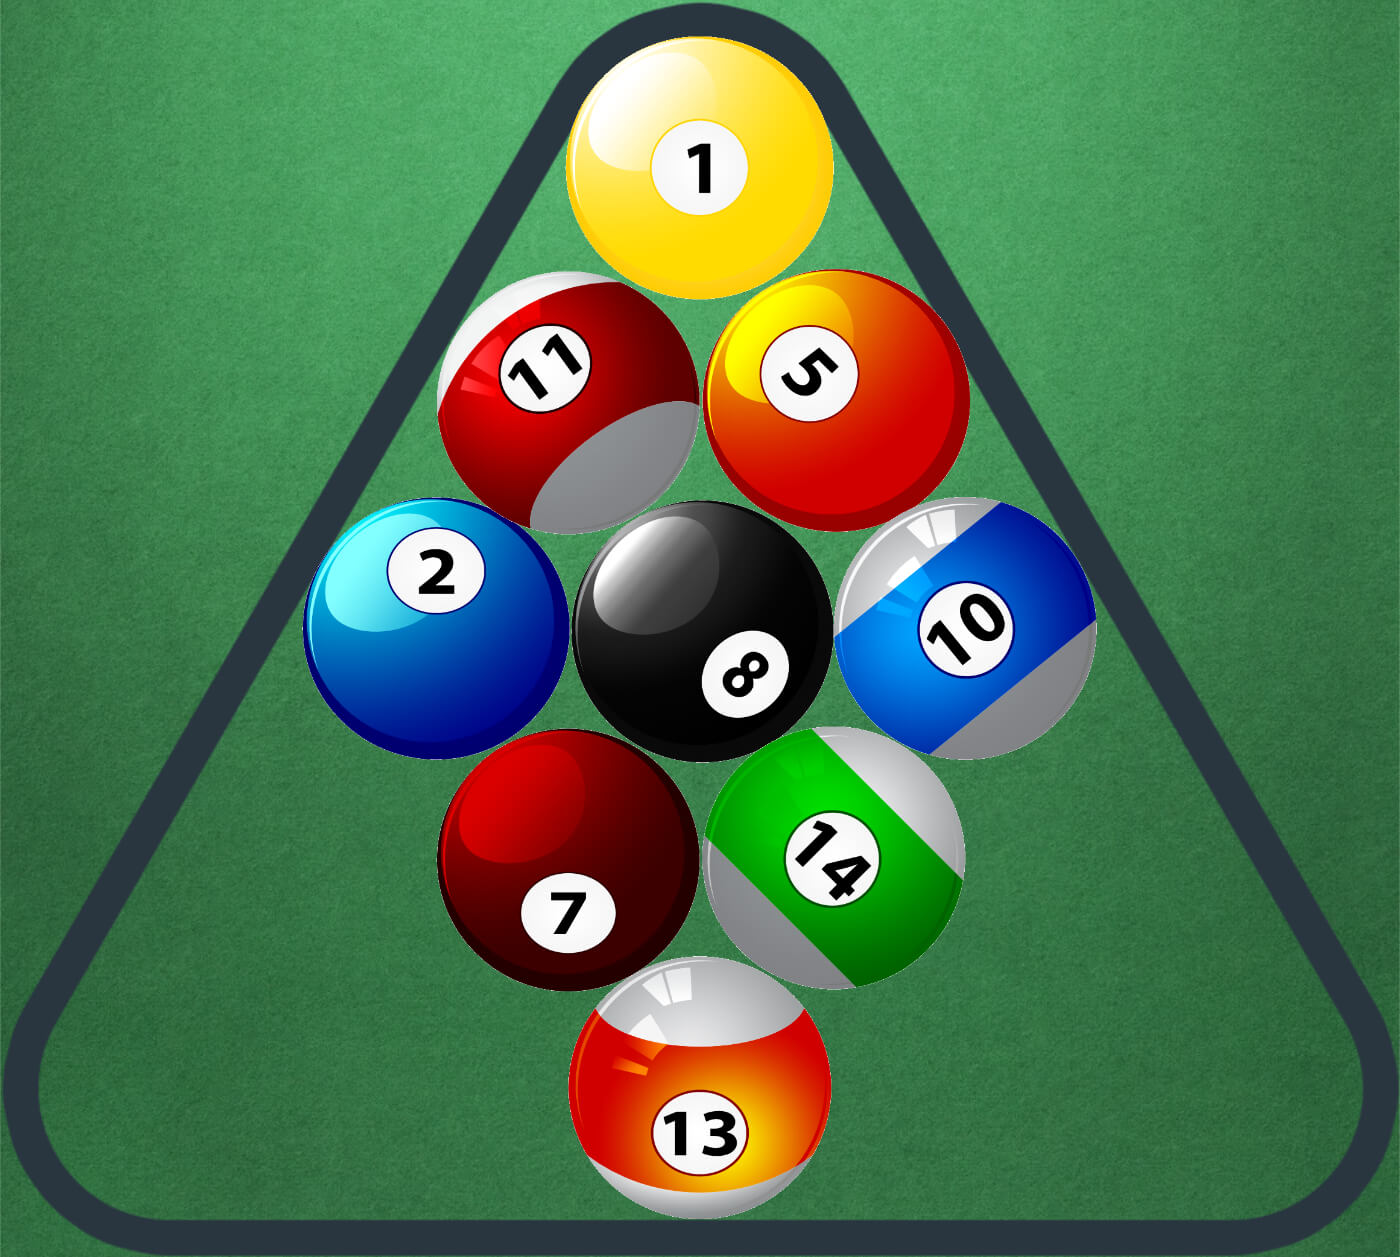 all red balls with pool